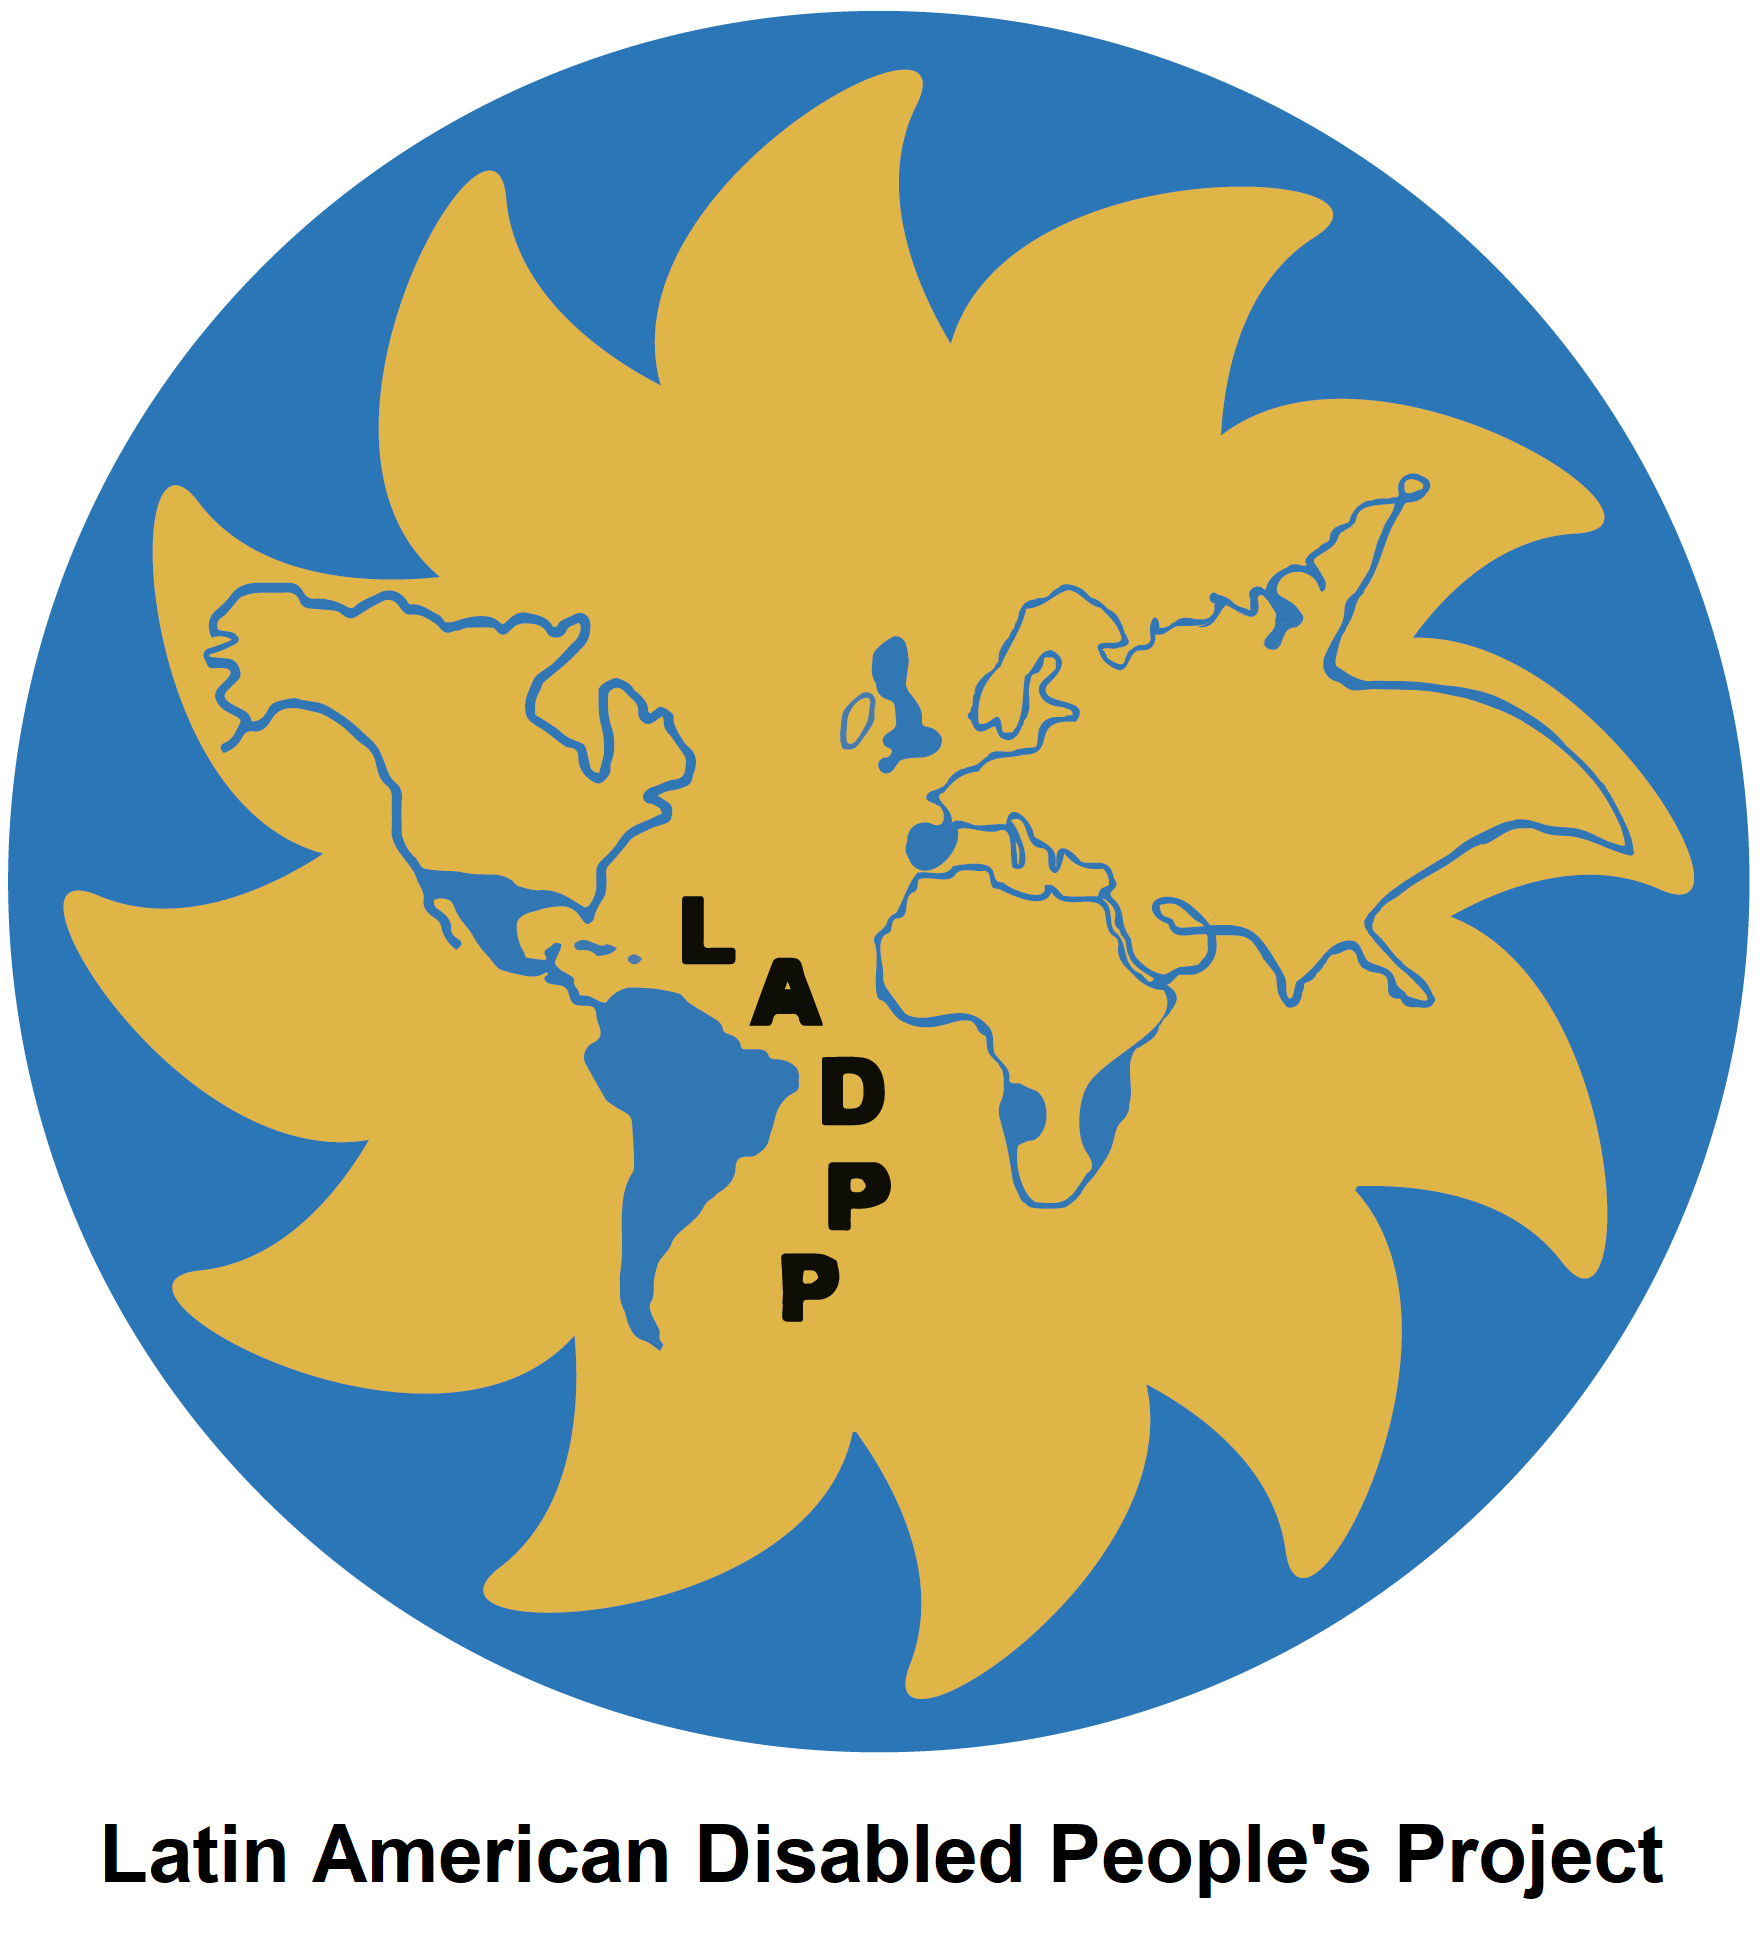 Latin American Disabled People's Project